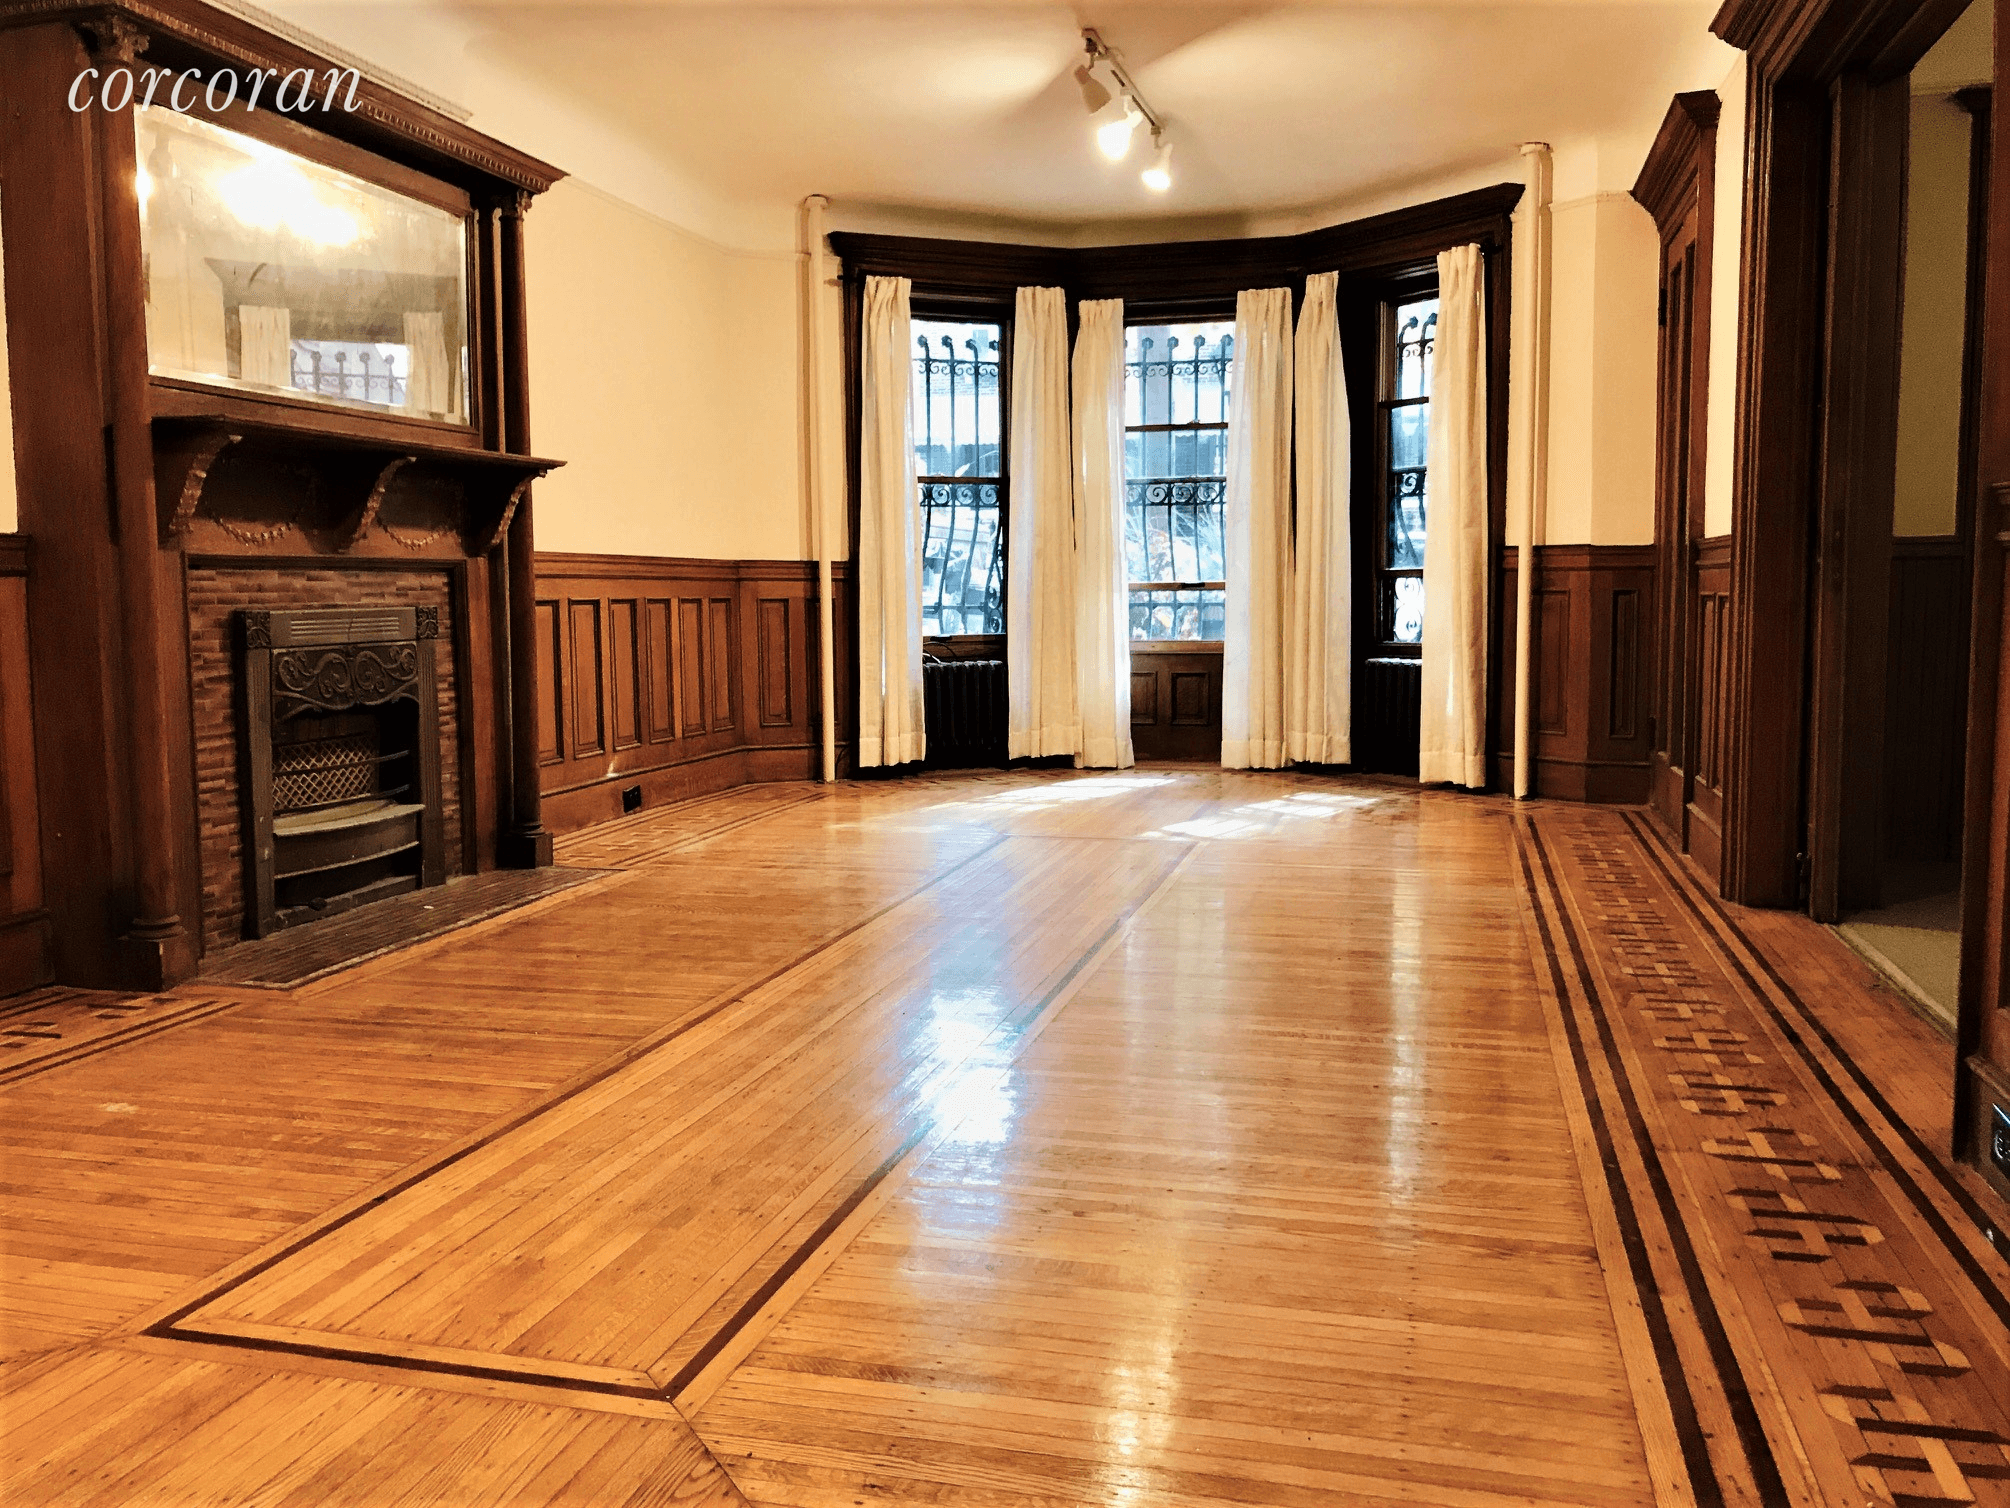 You will love this enchanting 1 bedroom 1 bath 850 sq ft garden apartment in the Historic Stuyvesant Heights district.